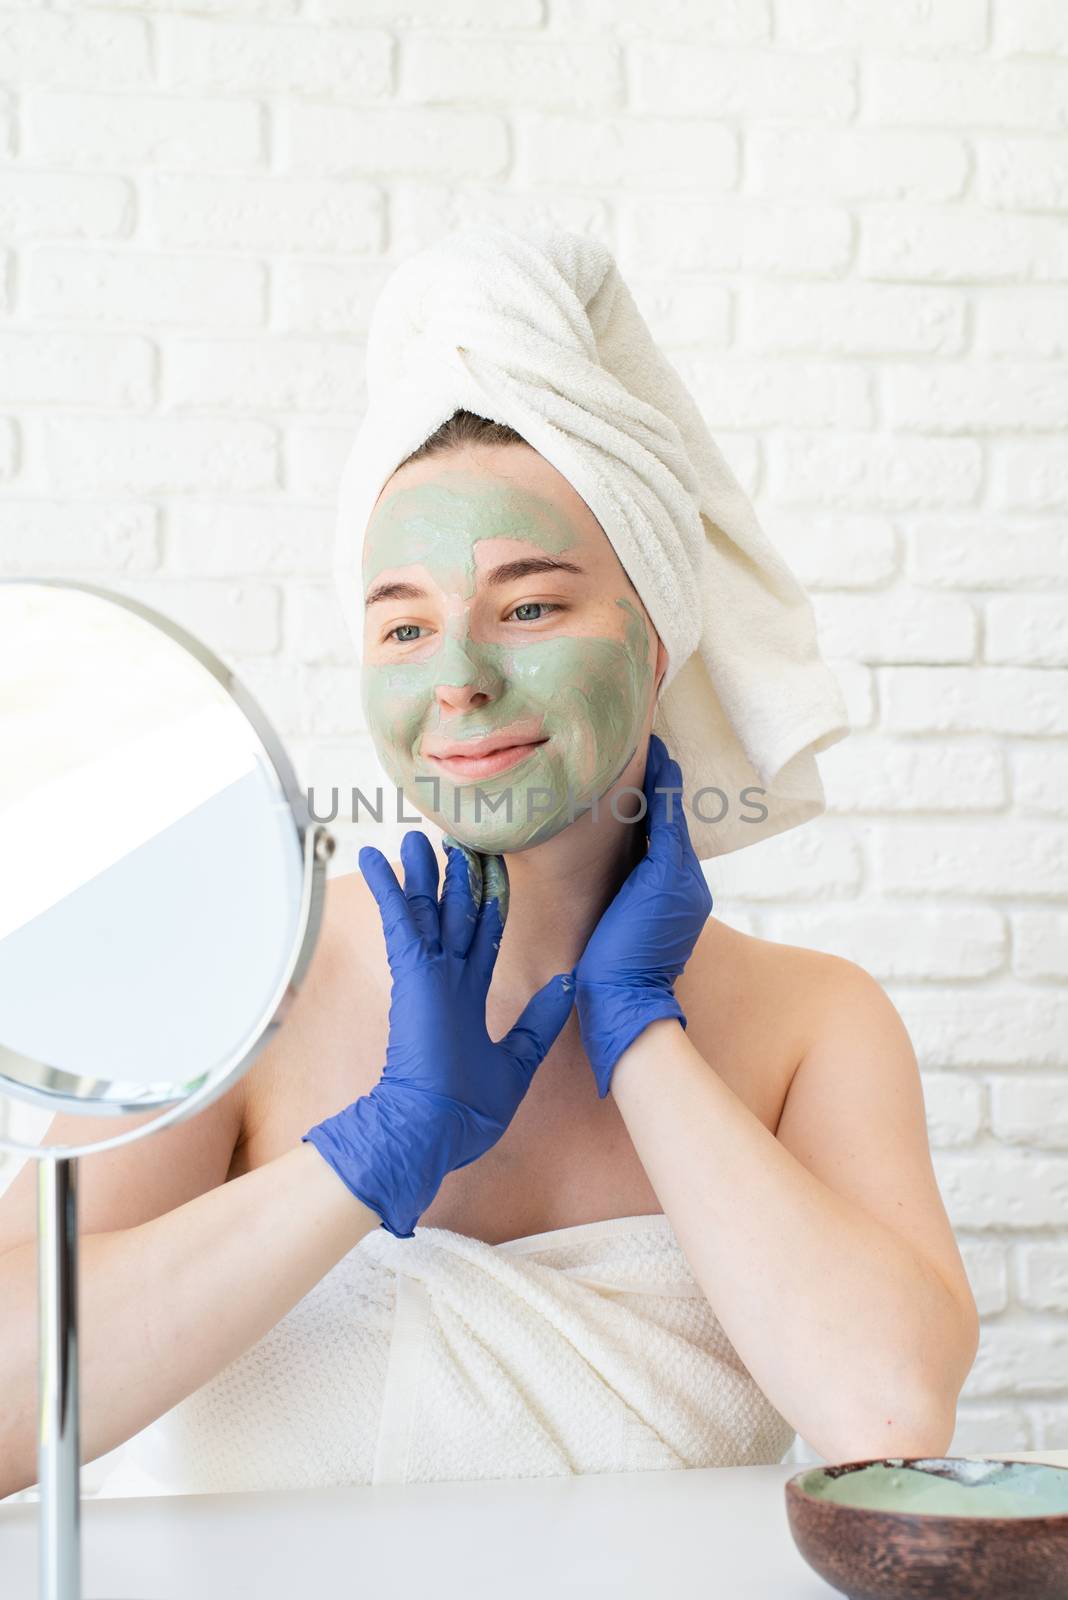 Spa and wellness. Natural cosmetics. Self care. Happy young caucasian woman in white bath towels wearing gloves applying clay face mask looking at the mirror